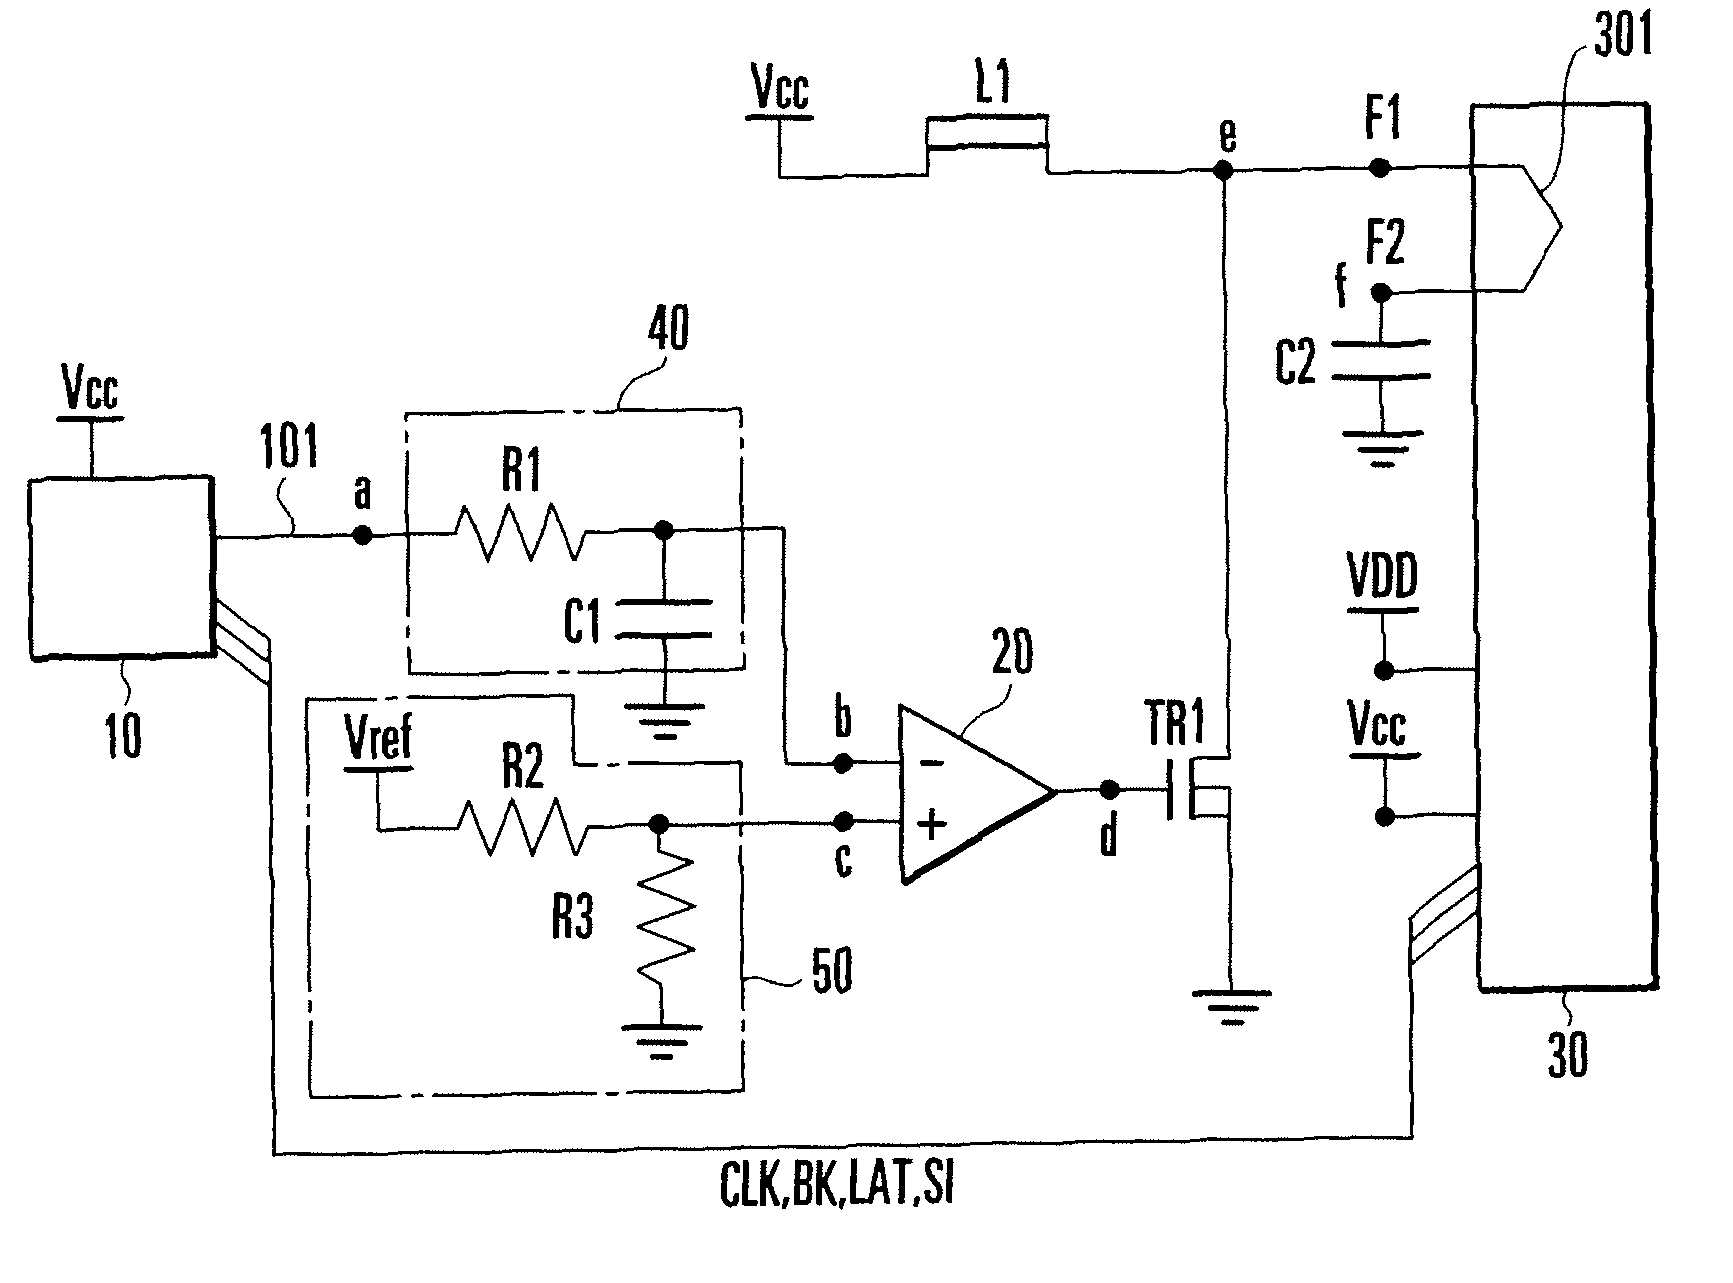 Filament power supply circuit for vacuum fluorescent display